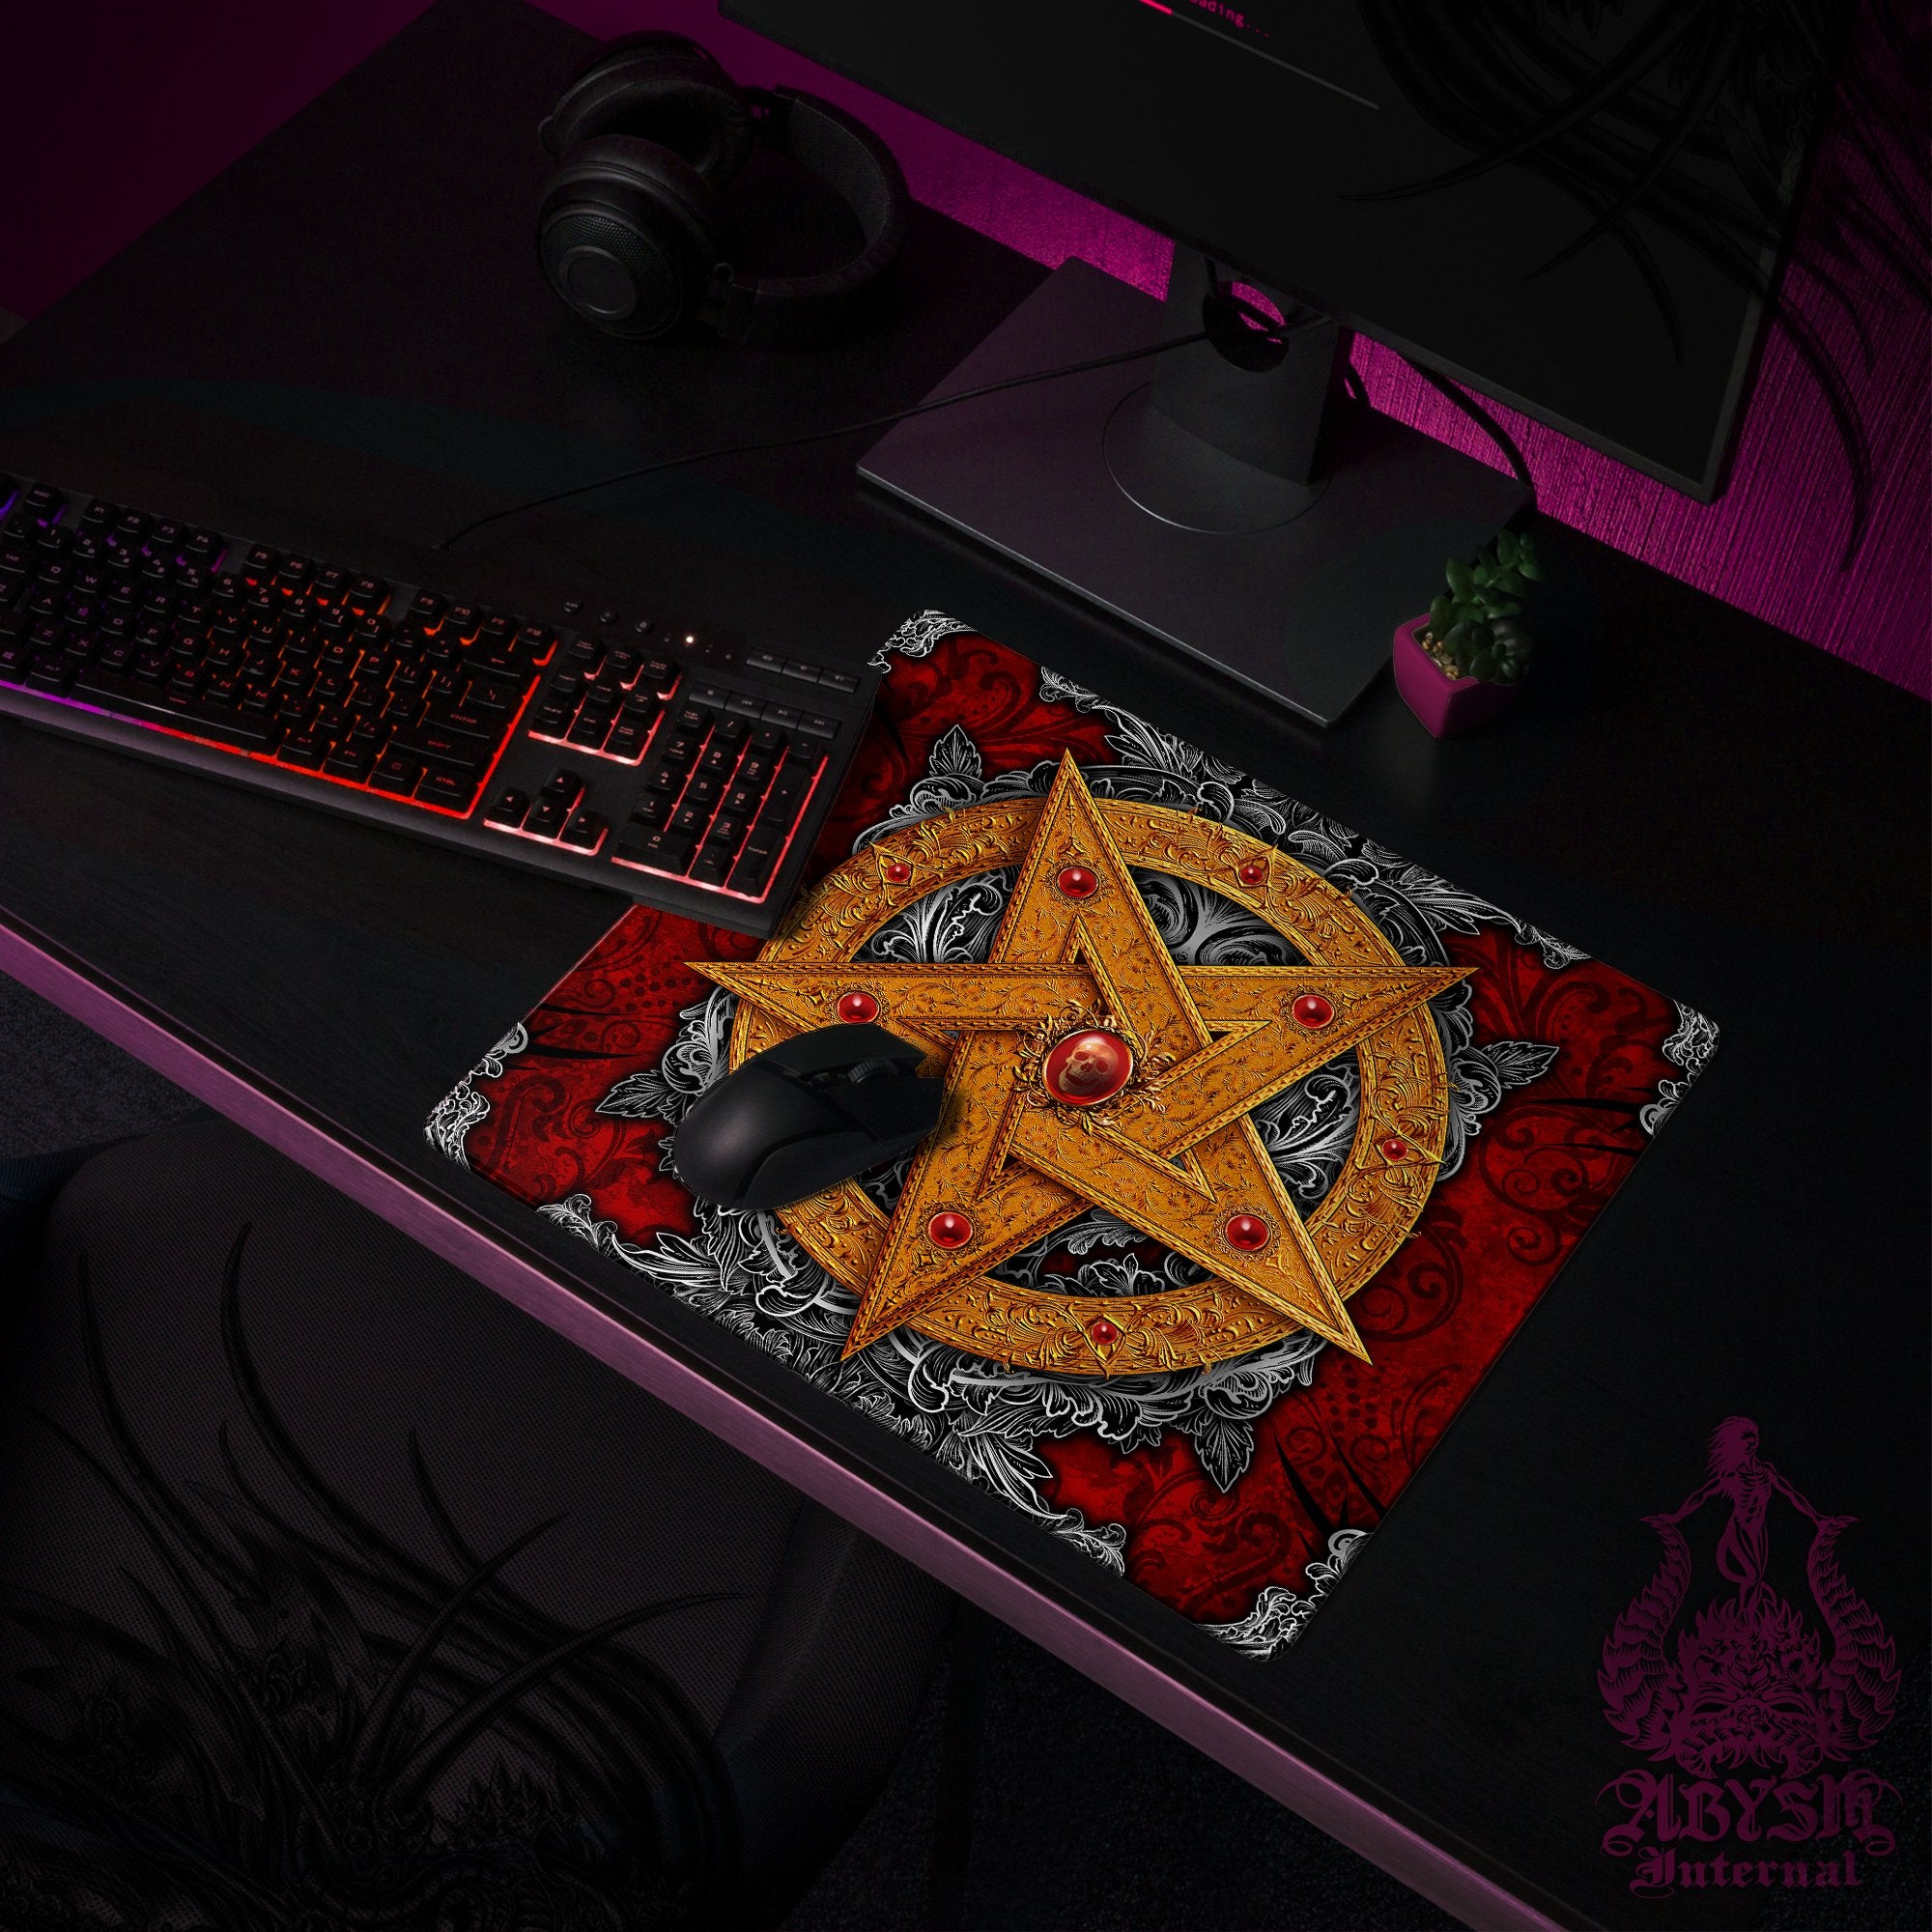 Witch Mouse Pad, Gold Pentagram Gaming Desk Mat, Witch Workpad, Goth Table Protector Cover, Satanic Art Print - 4 Options - Abysm Internal